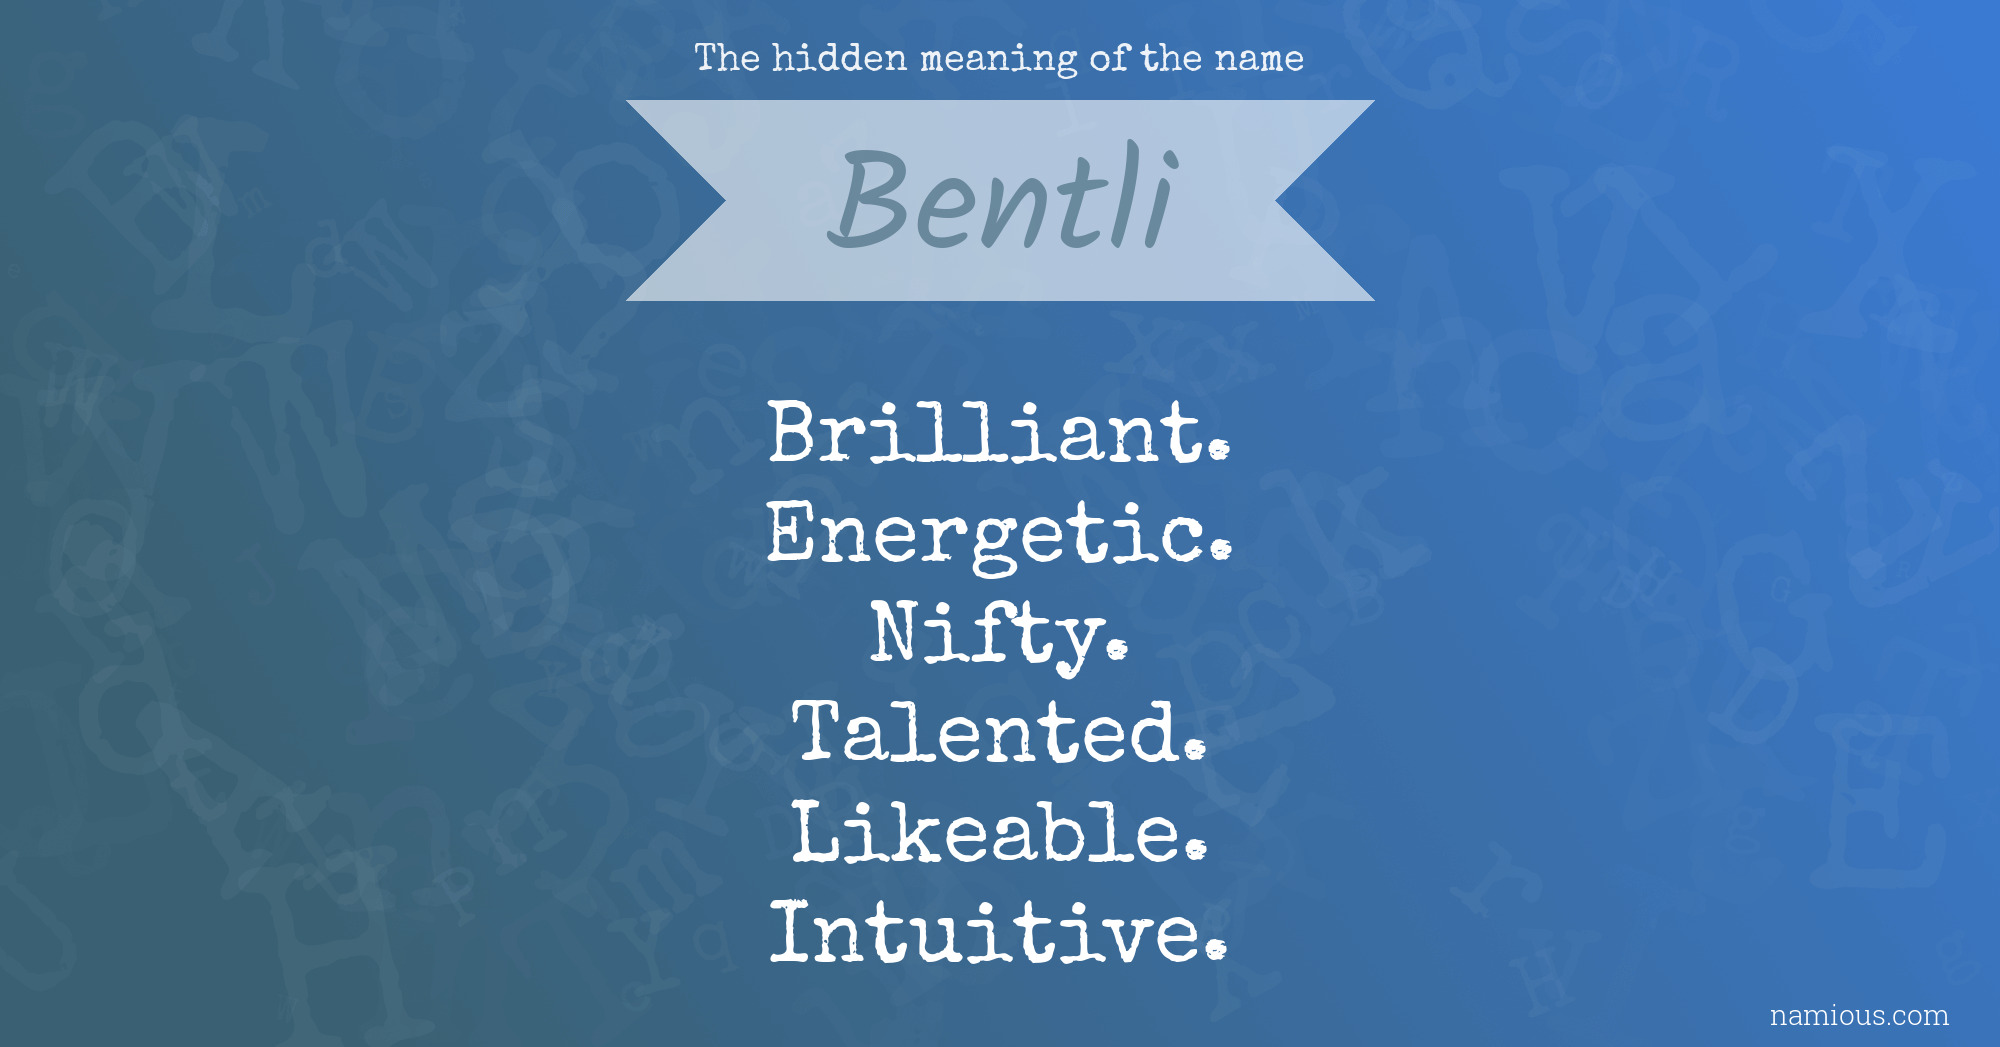 The hidden meaning of the name Bentli